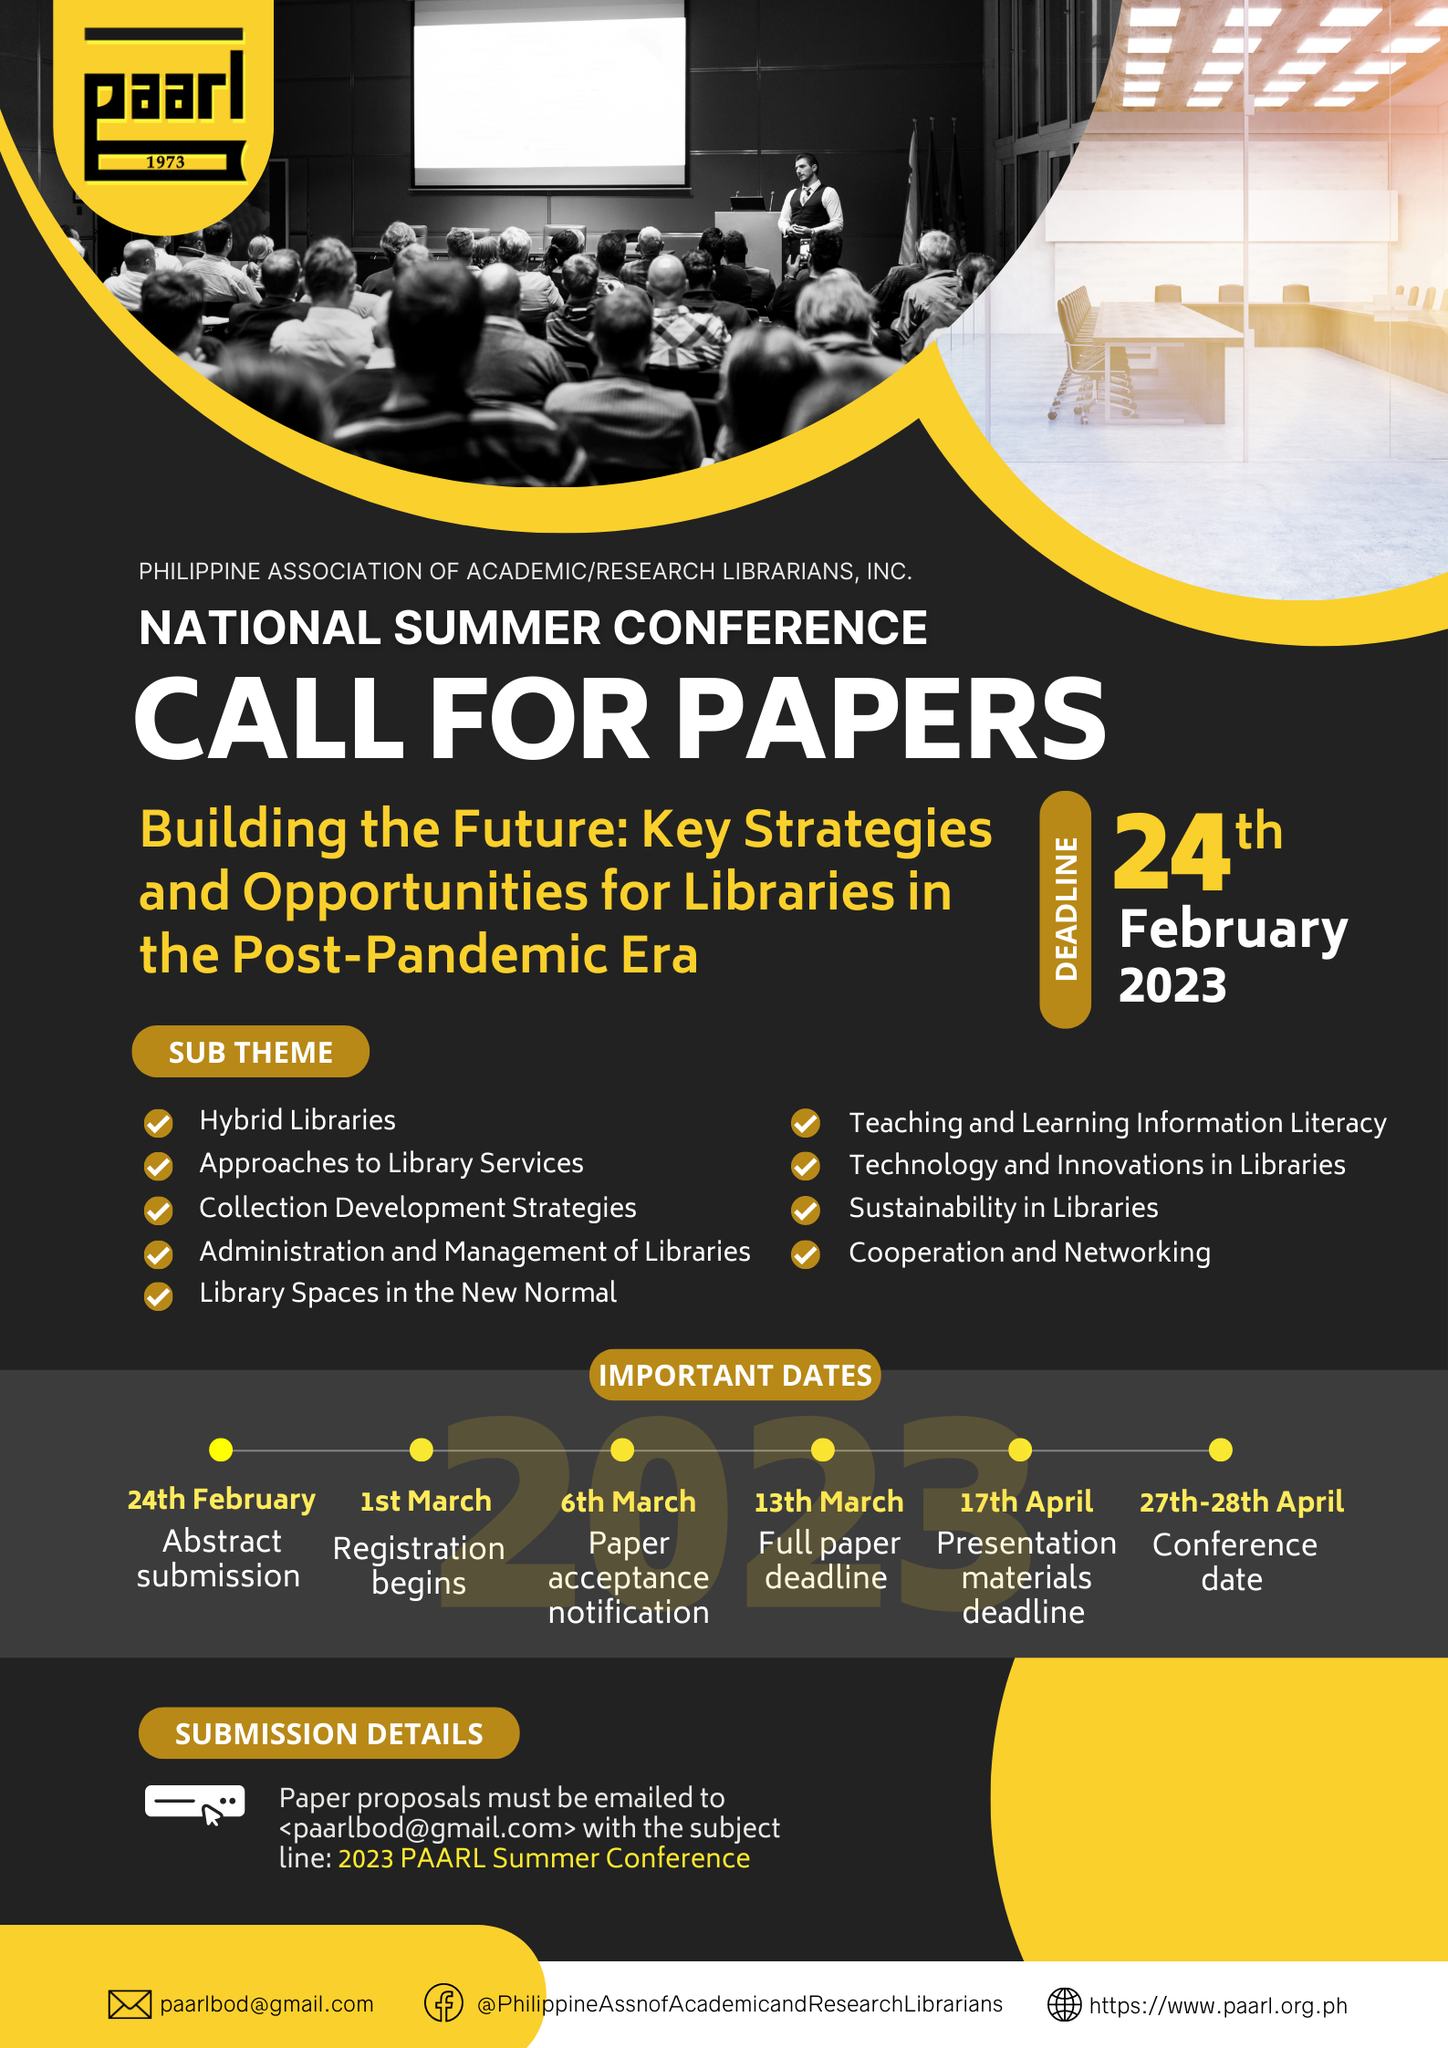 CALL FOR PAPERS: NATIONAL SUMMER CONFERENCE 2023!